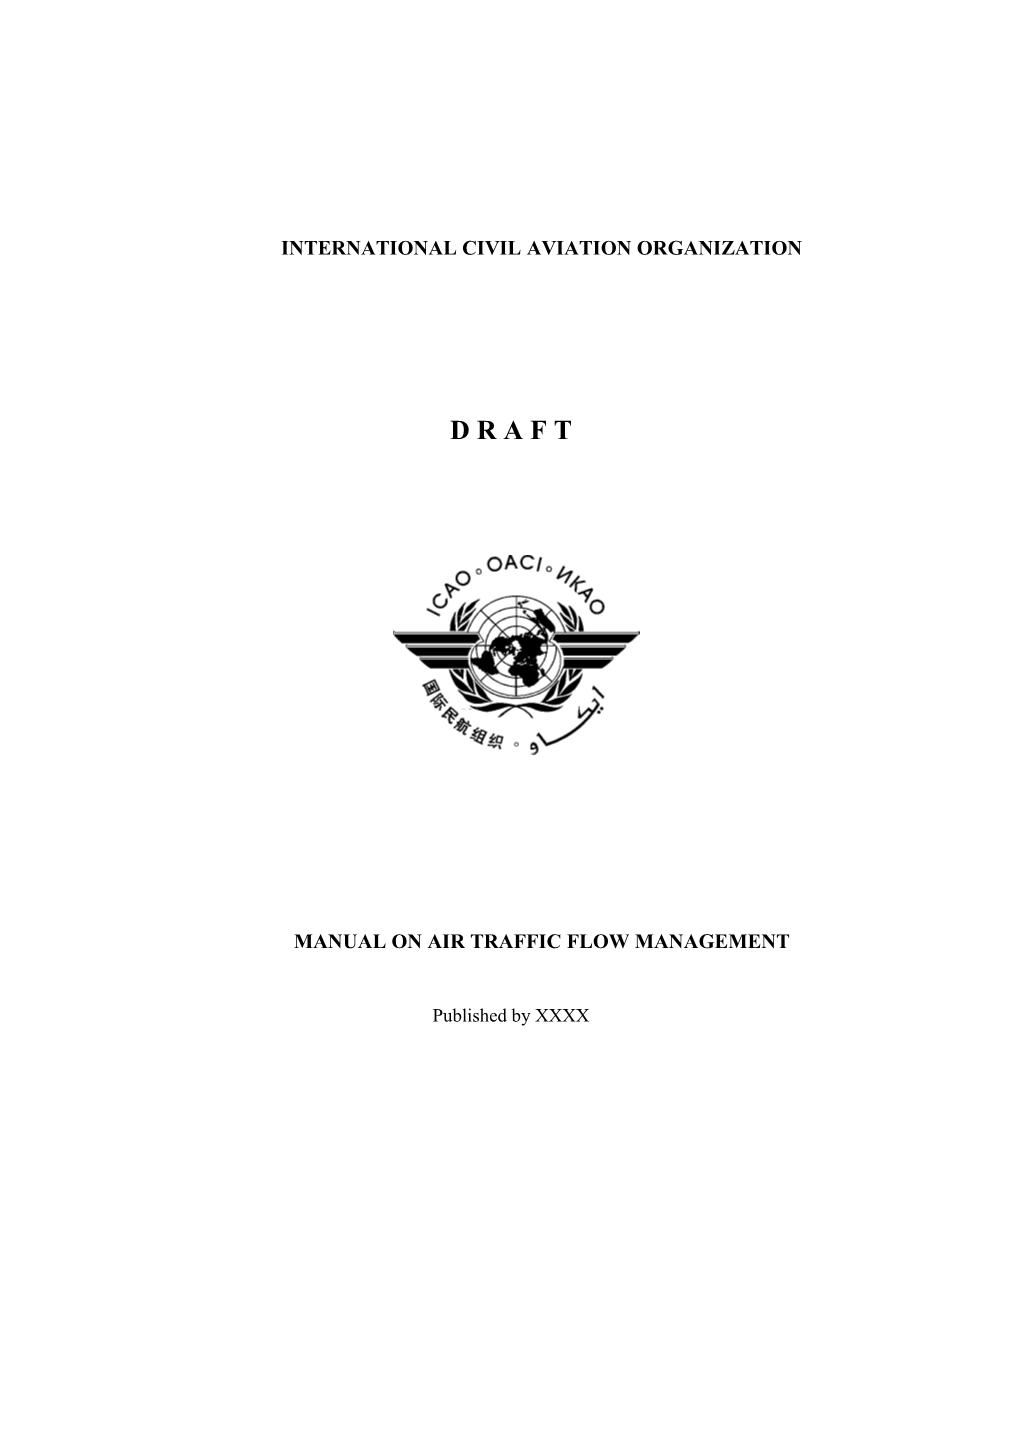 Working Draft of the ATFM Manual V0